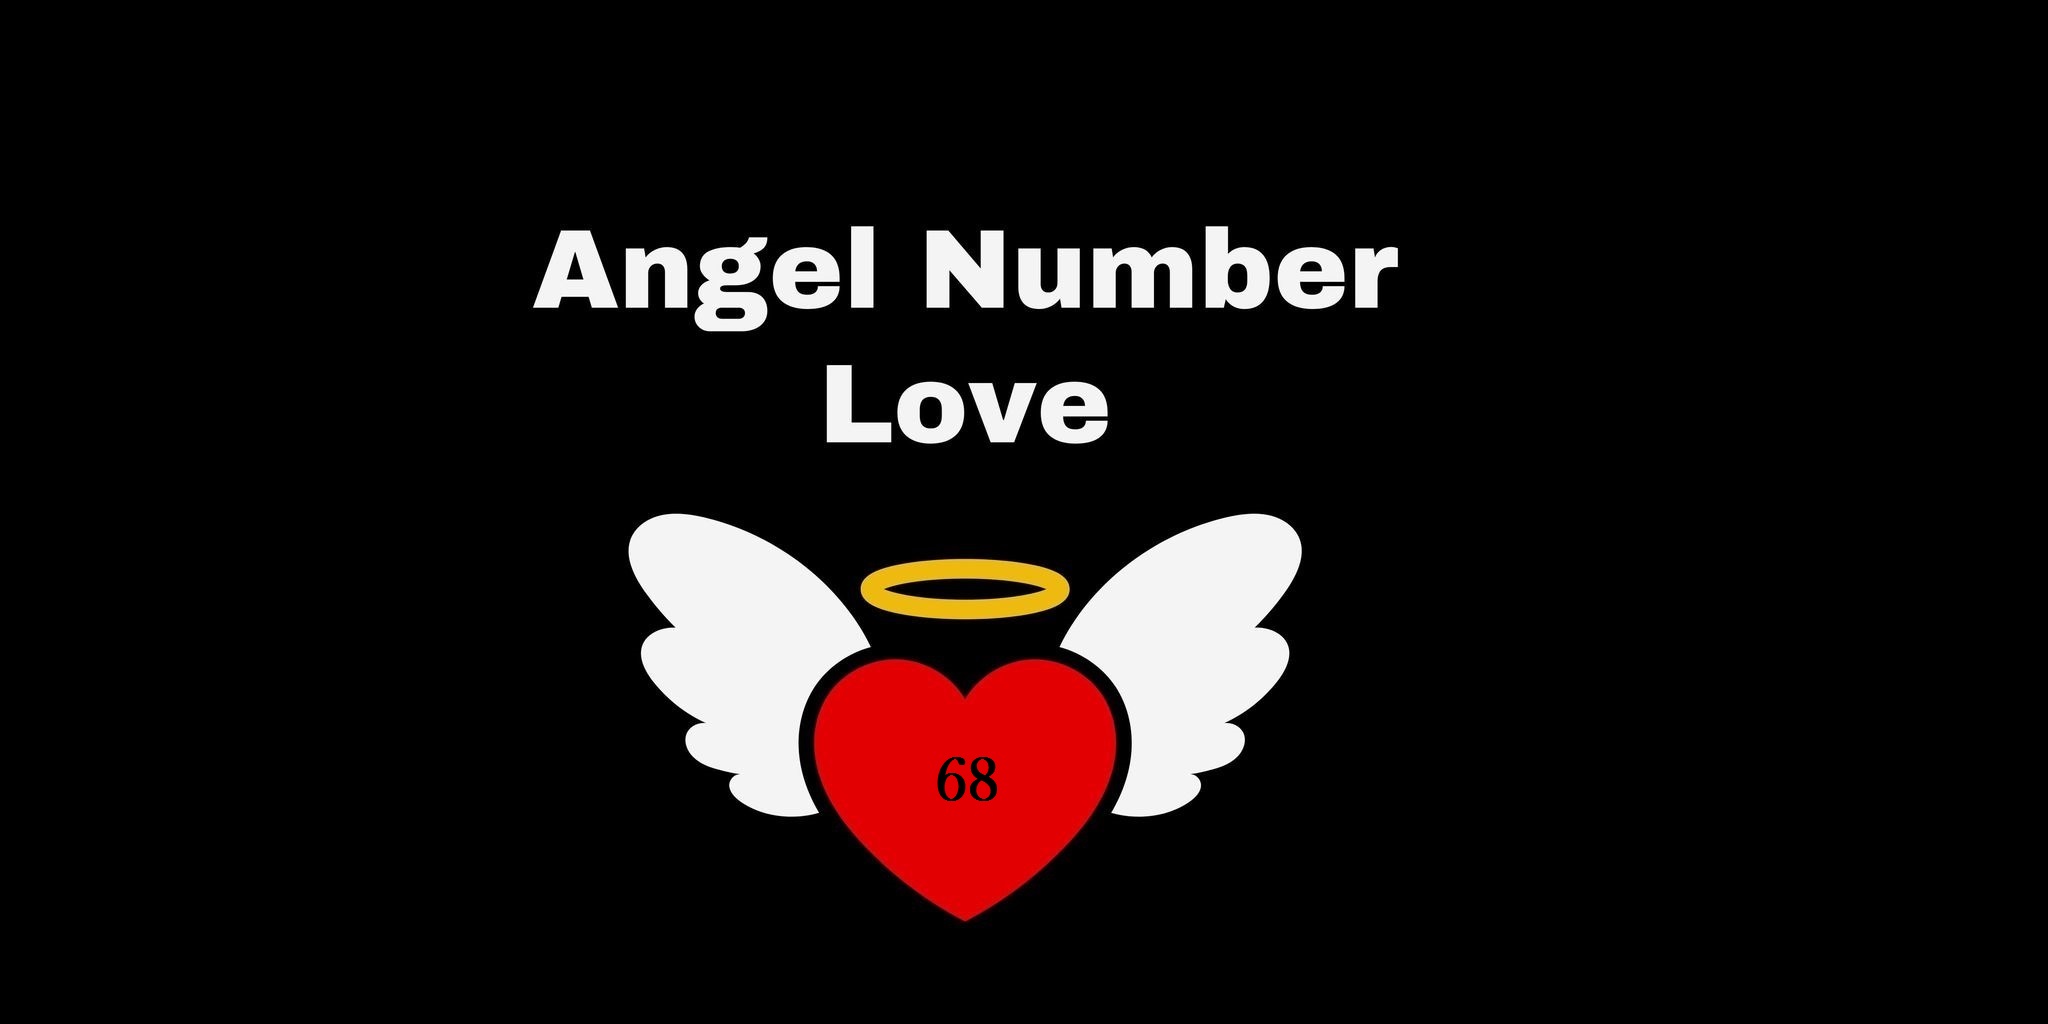 68 Angel Number Meaning In Love